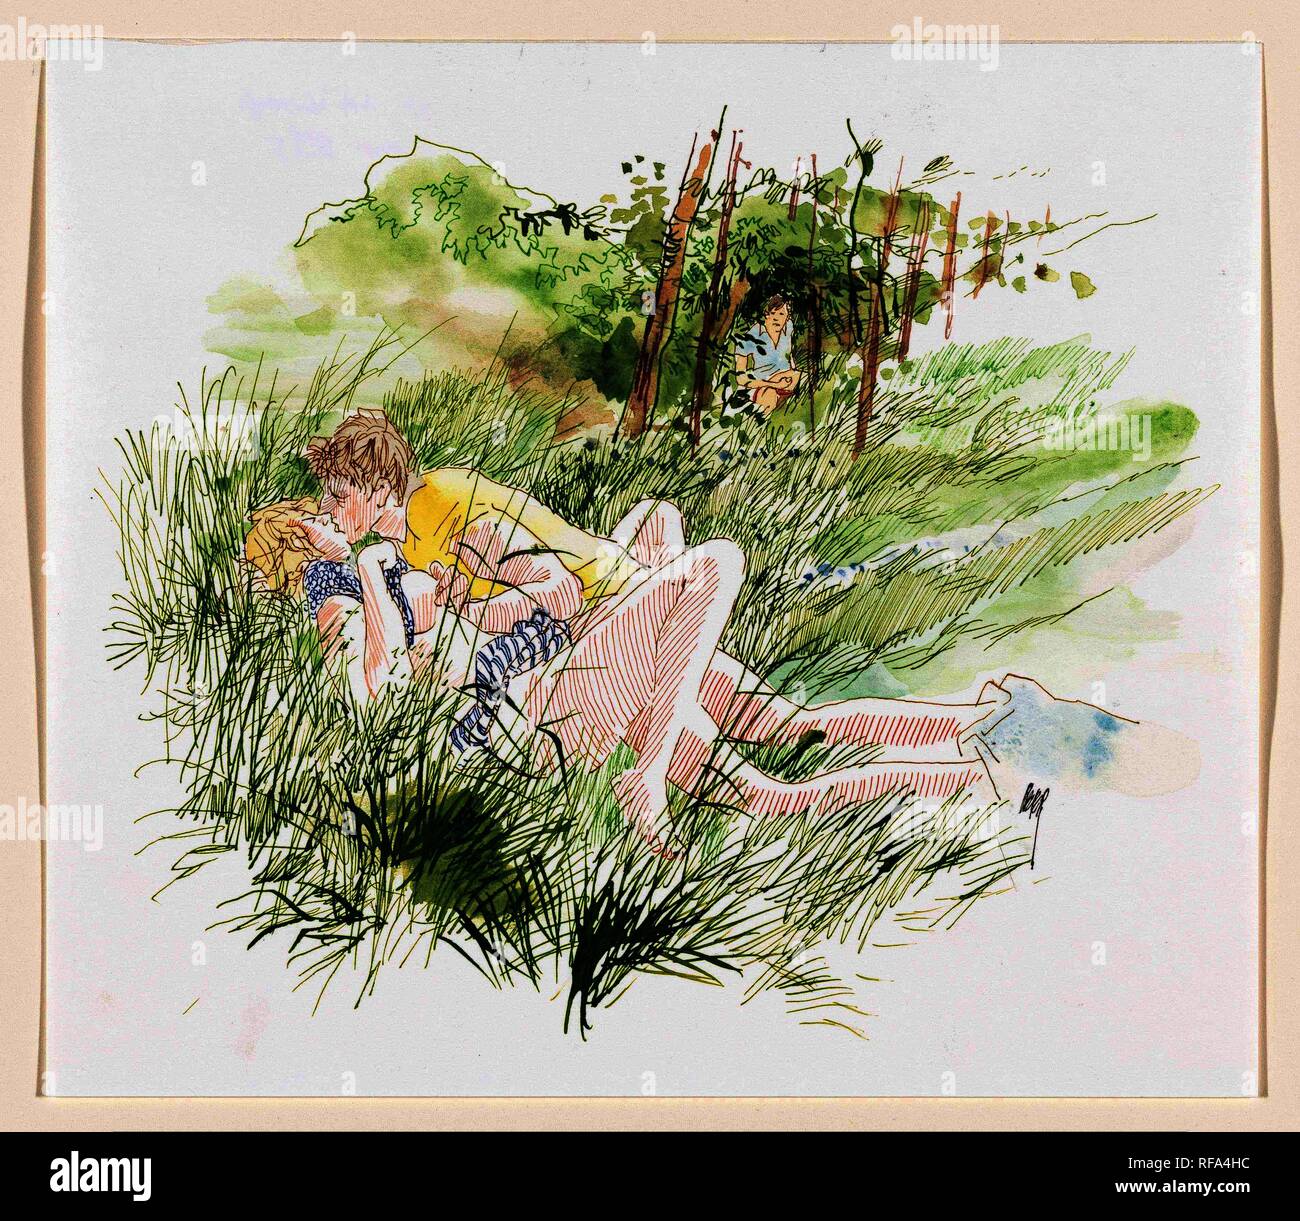 Loving couple in thickets. Draughtsman: Peter van Straaten (signed by artist). Dating: 1945 - 2010. Place: Amsterdam. Measurements: h 247 mm × w 286 mm. Museum: Rijksmuseum, Amsterdam. Stock Photo